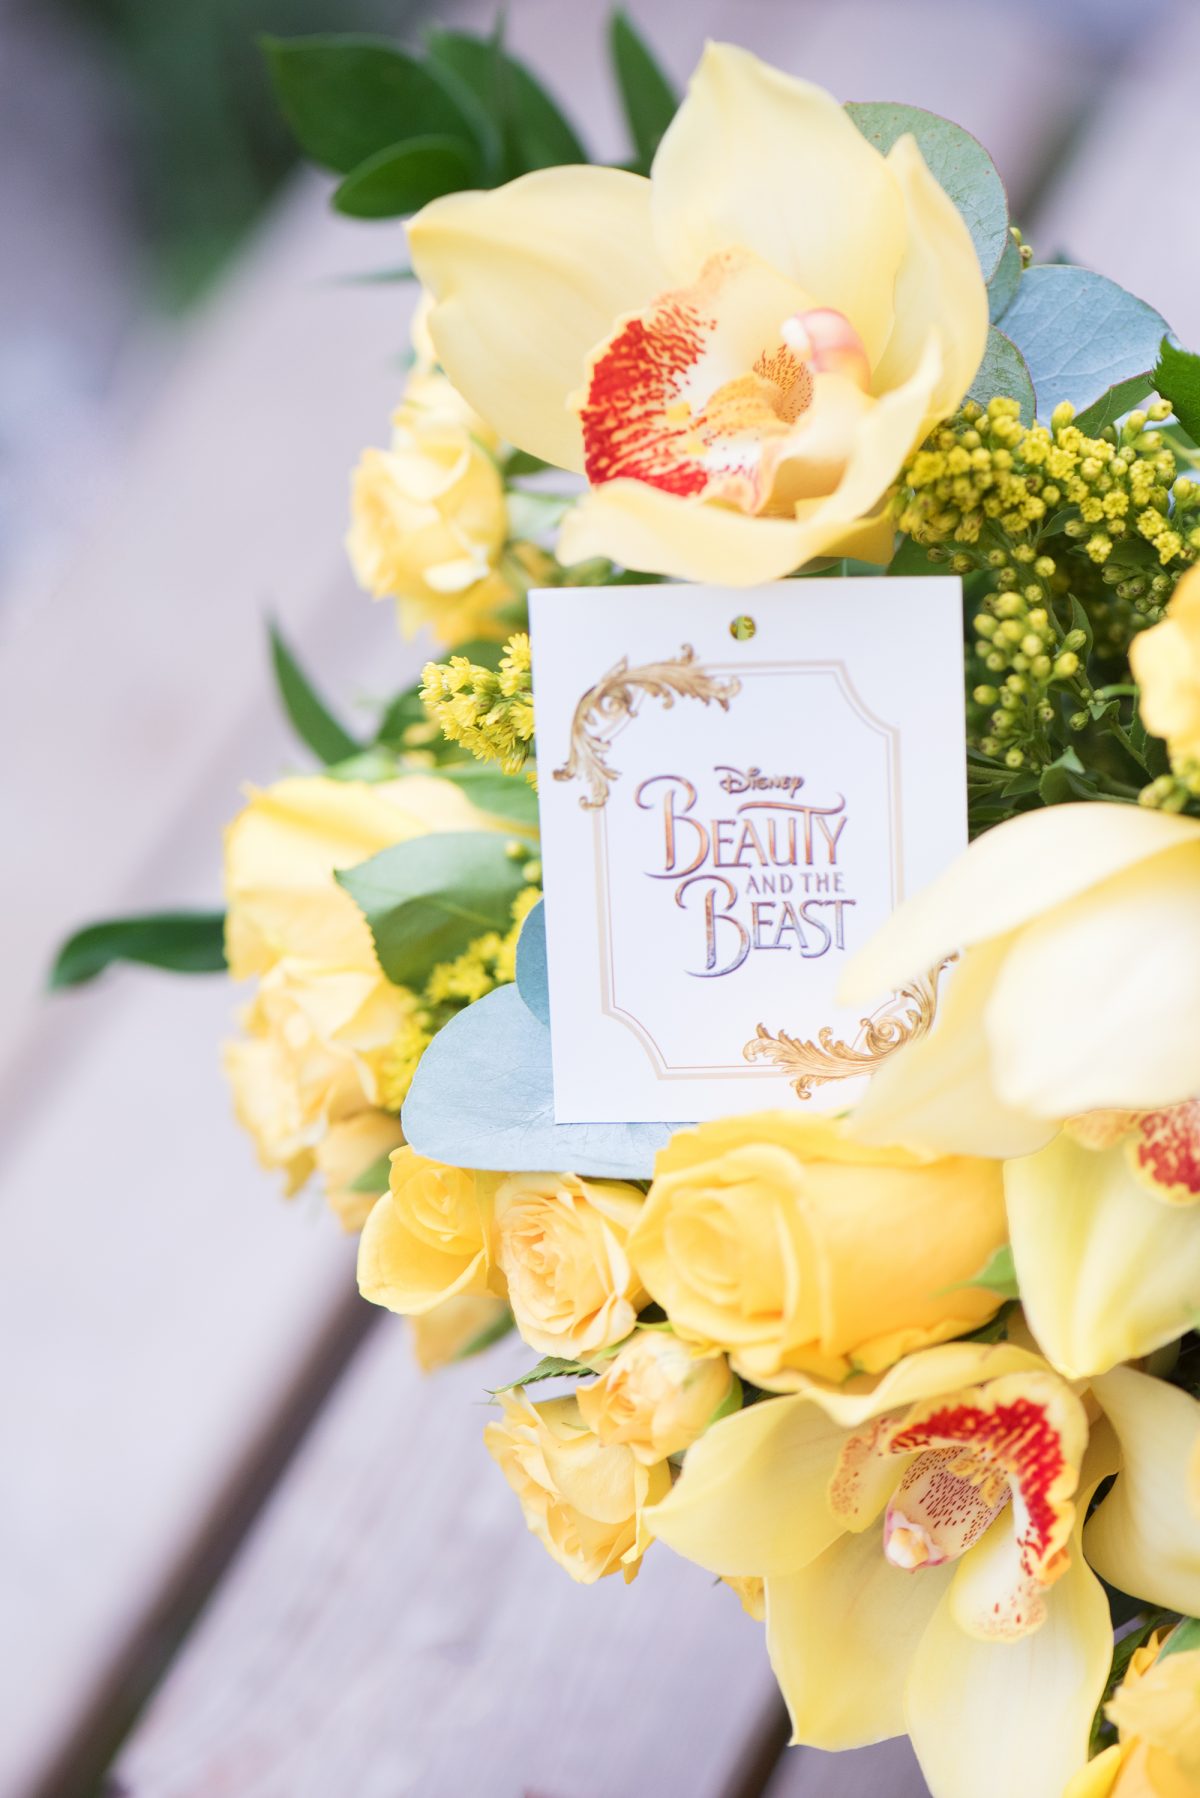 Disney flowers direct Beauty and the Beast